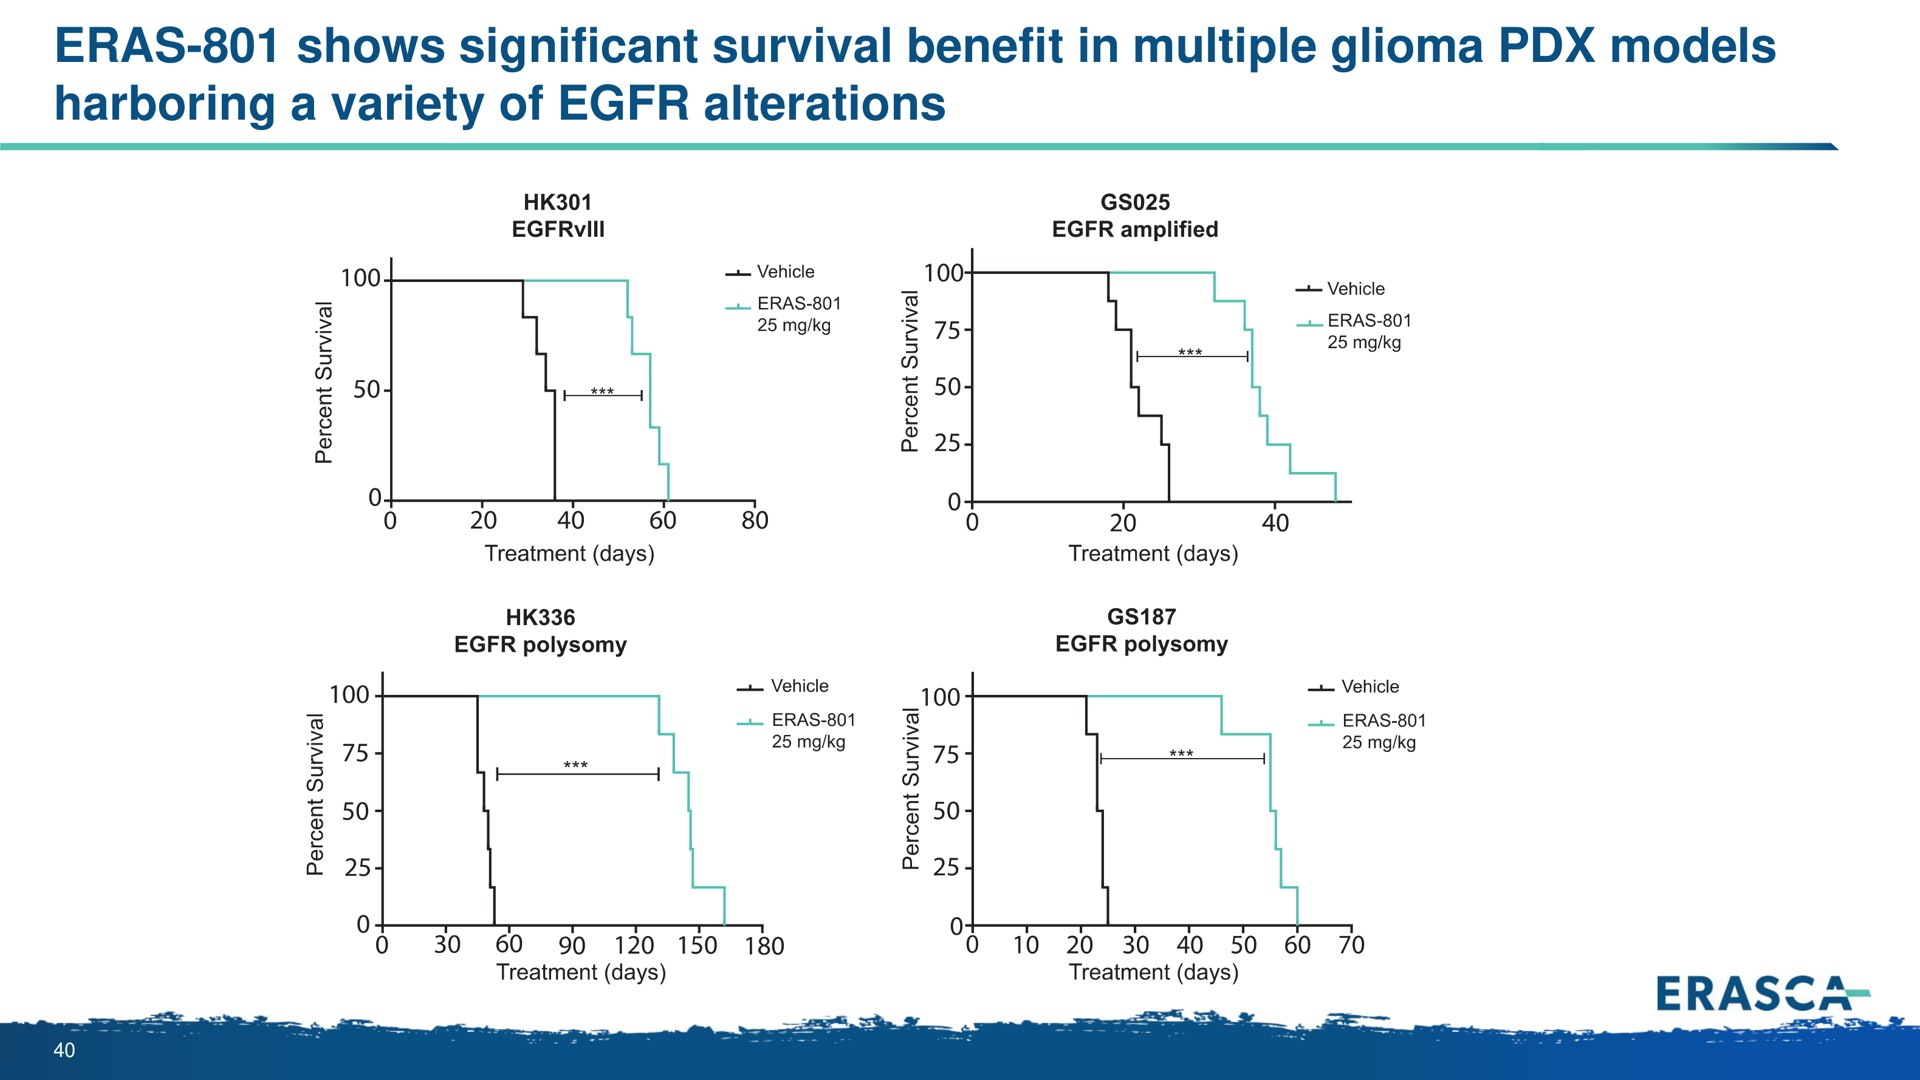 eras shows significant survival benefit in multiple glioma models harboring a variety of alterations | Erasca